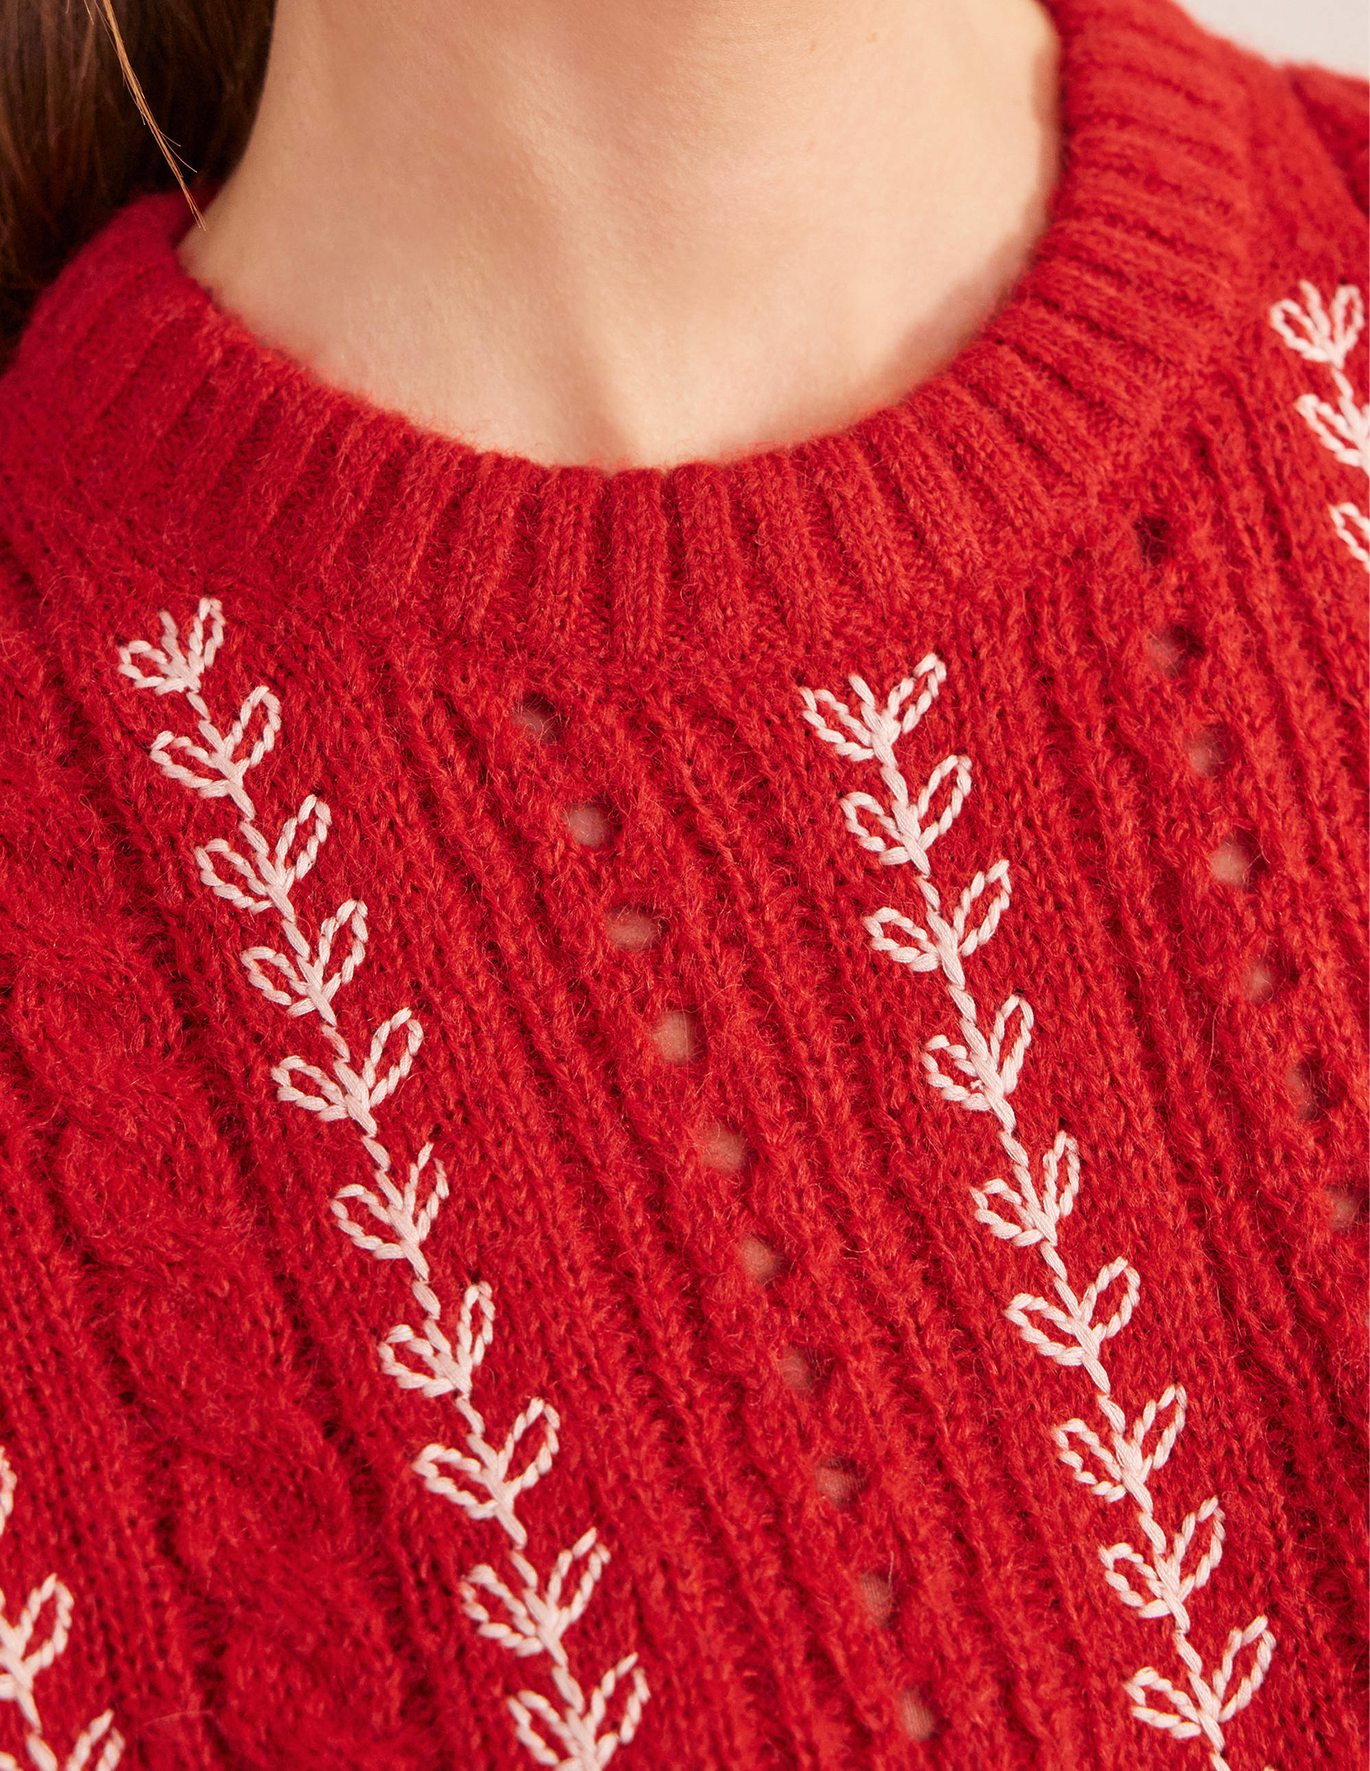 Boden Fluffy Embroidery Sweater - Tomato